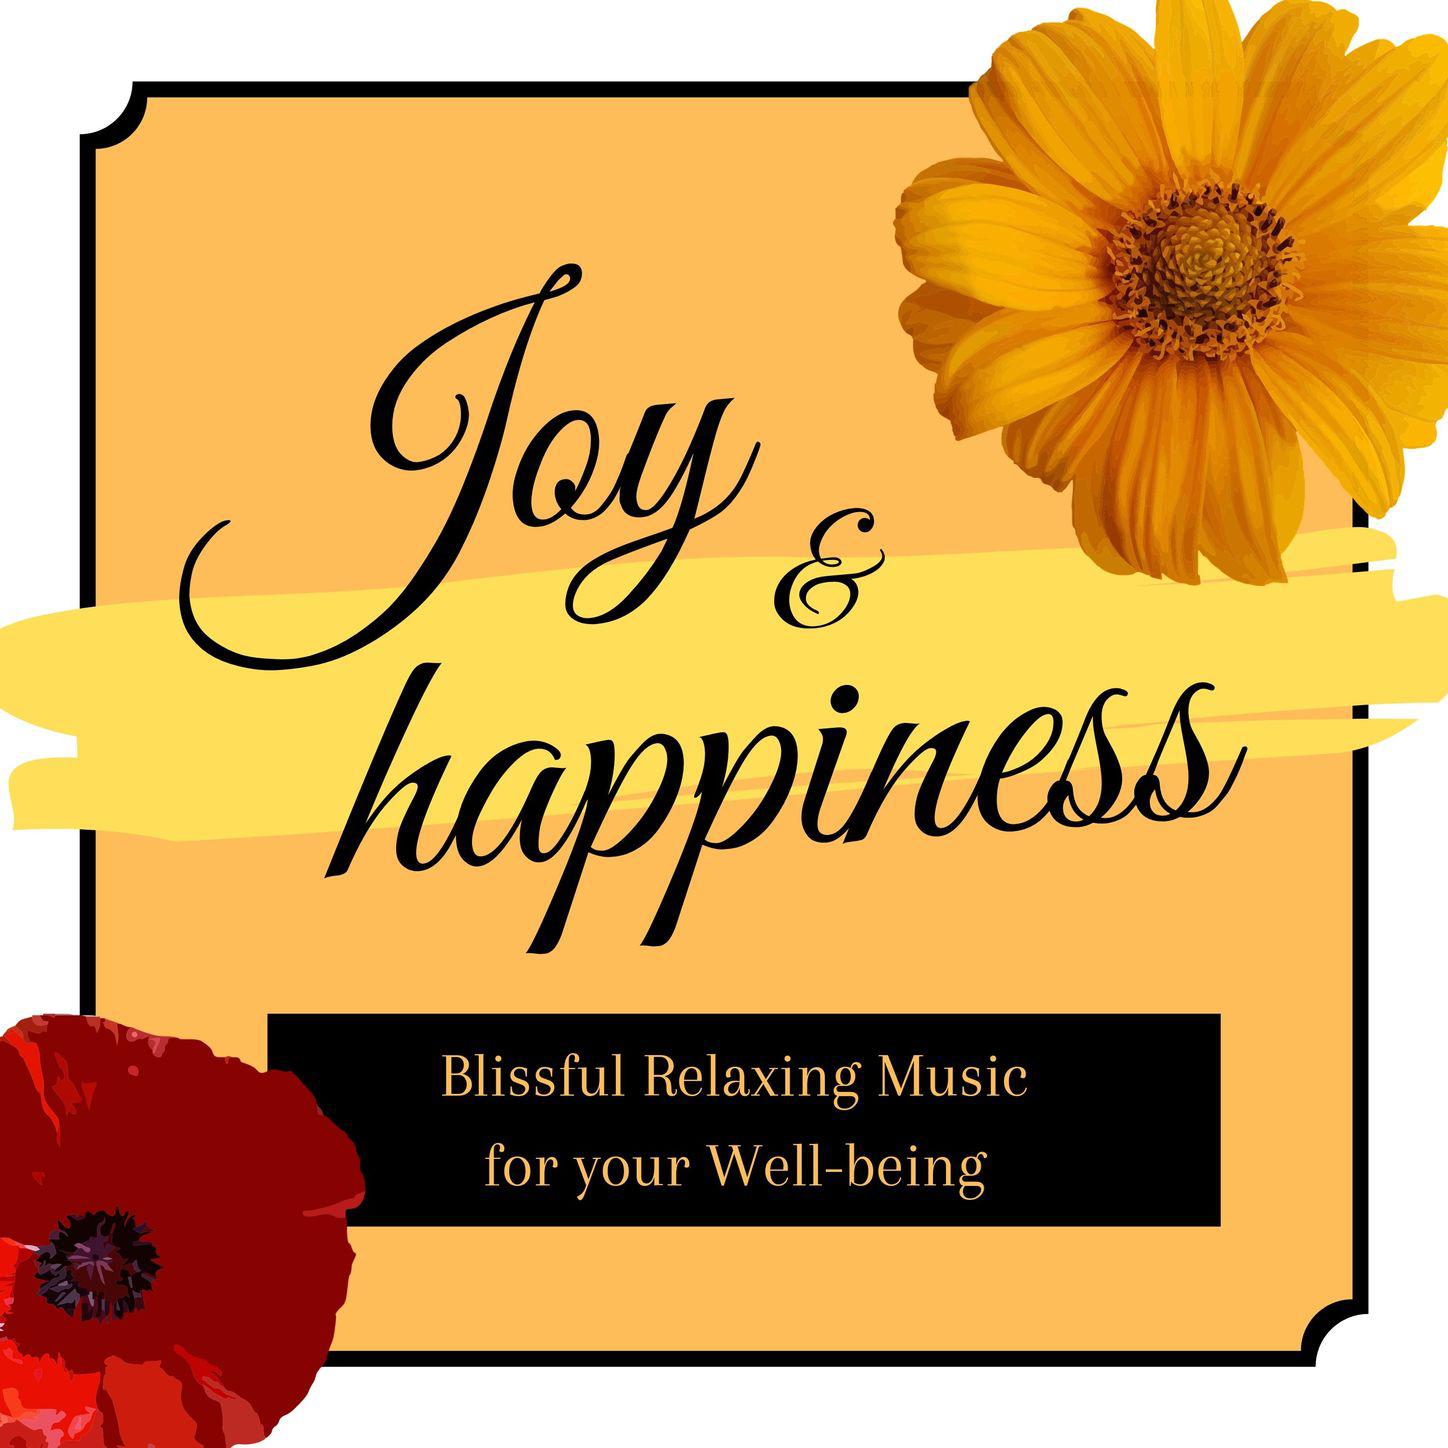 Joy & Happiness: Blissful Relaxing Music for your Well-being